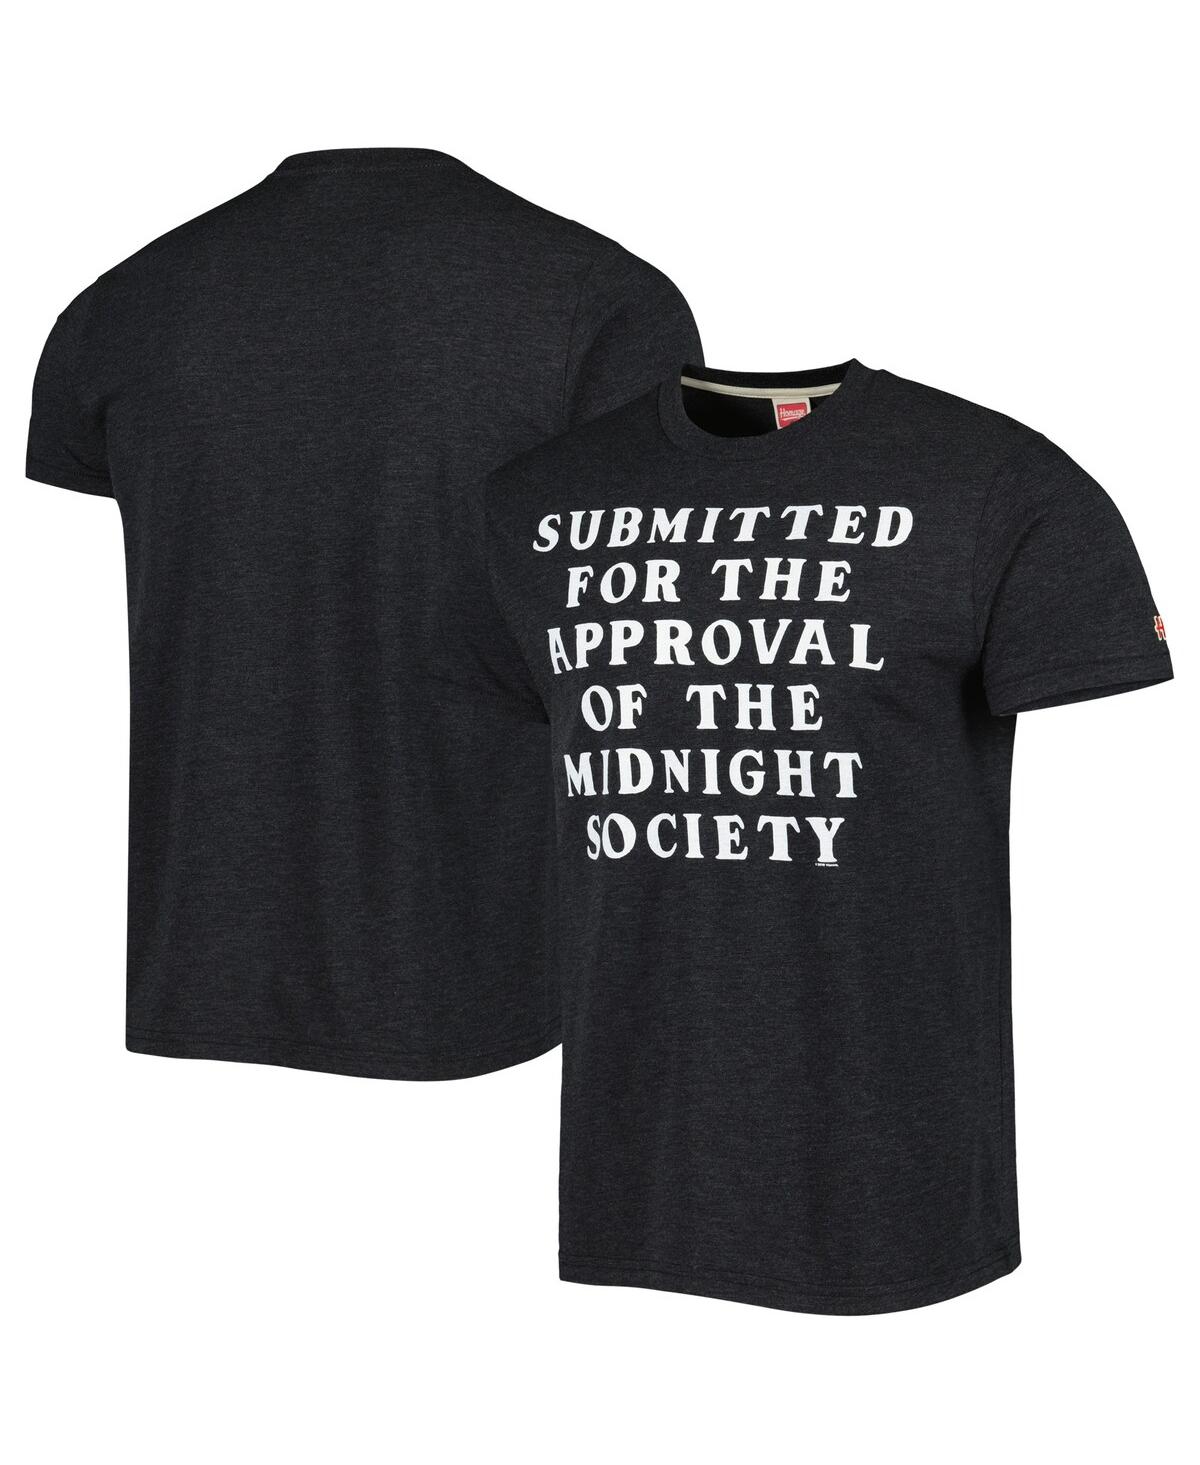 Men's and Women's Homage Charcoal Are You Afraid of the Dark? The Midnight Society Tri-Blend T-shirt - Charcoal